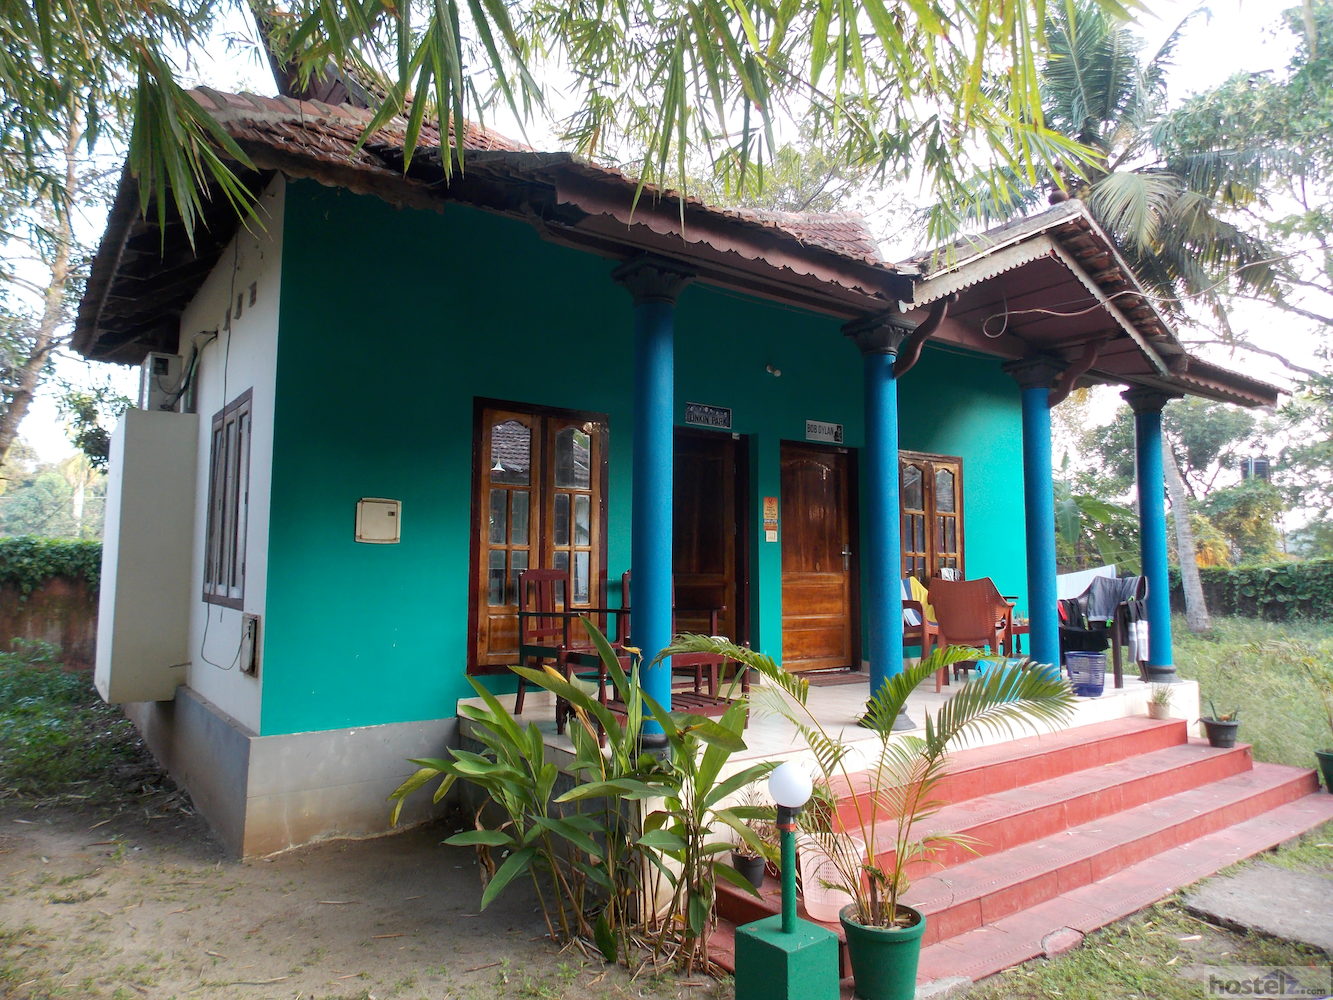 the hut that houses the female dorm